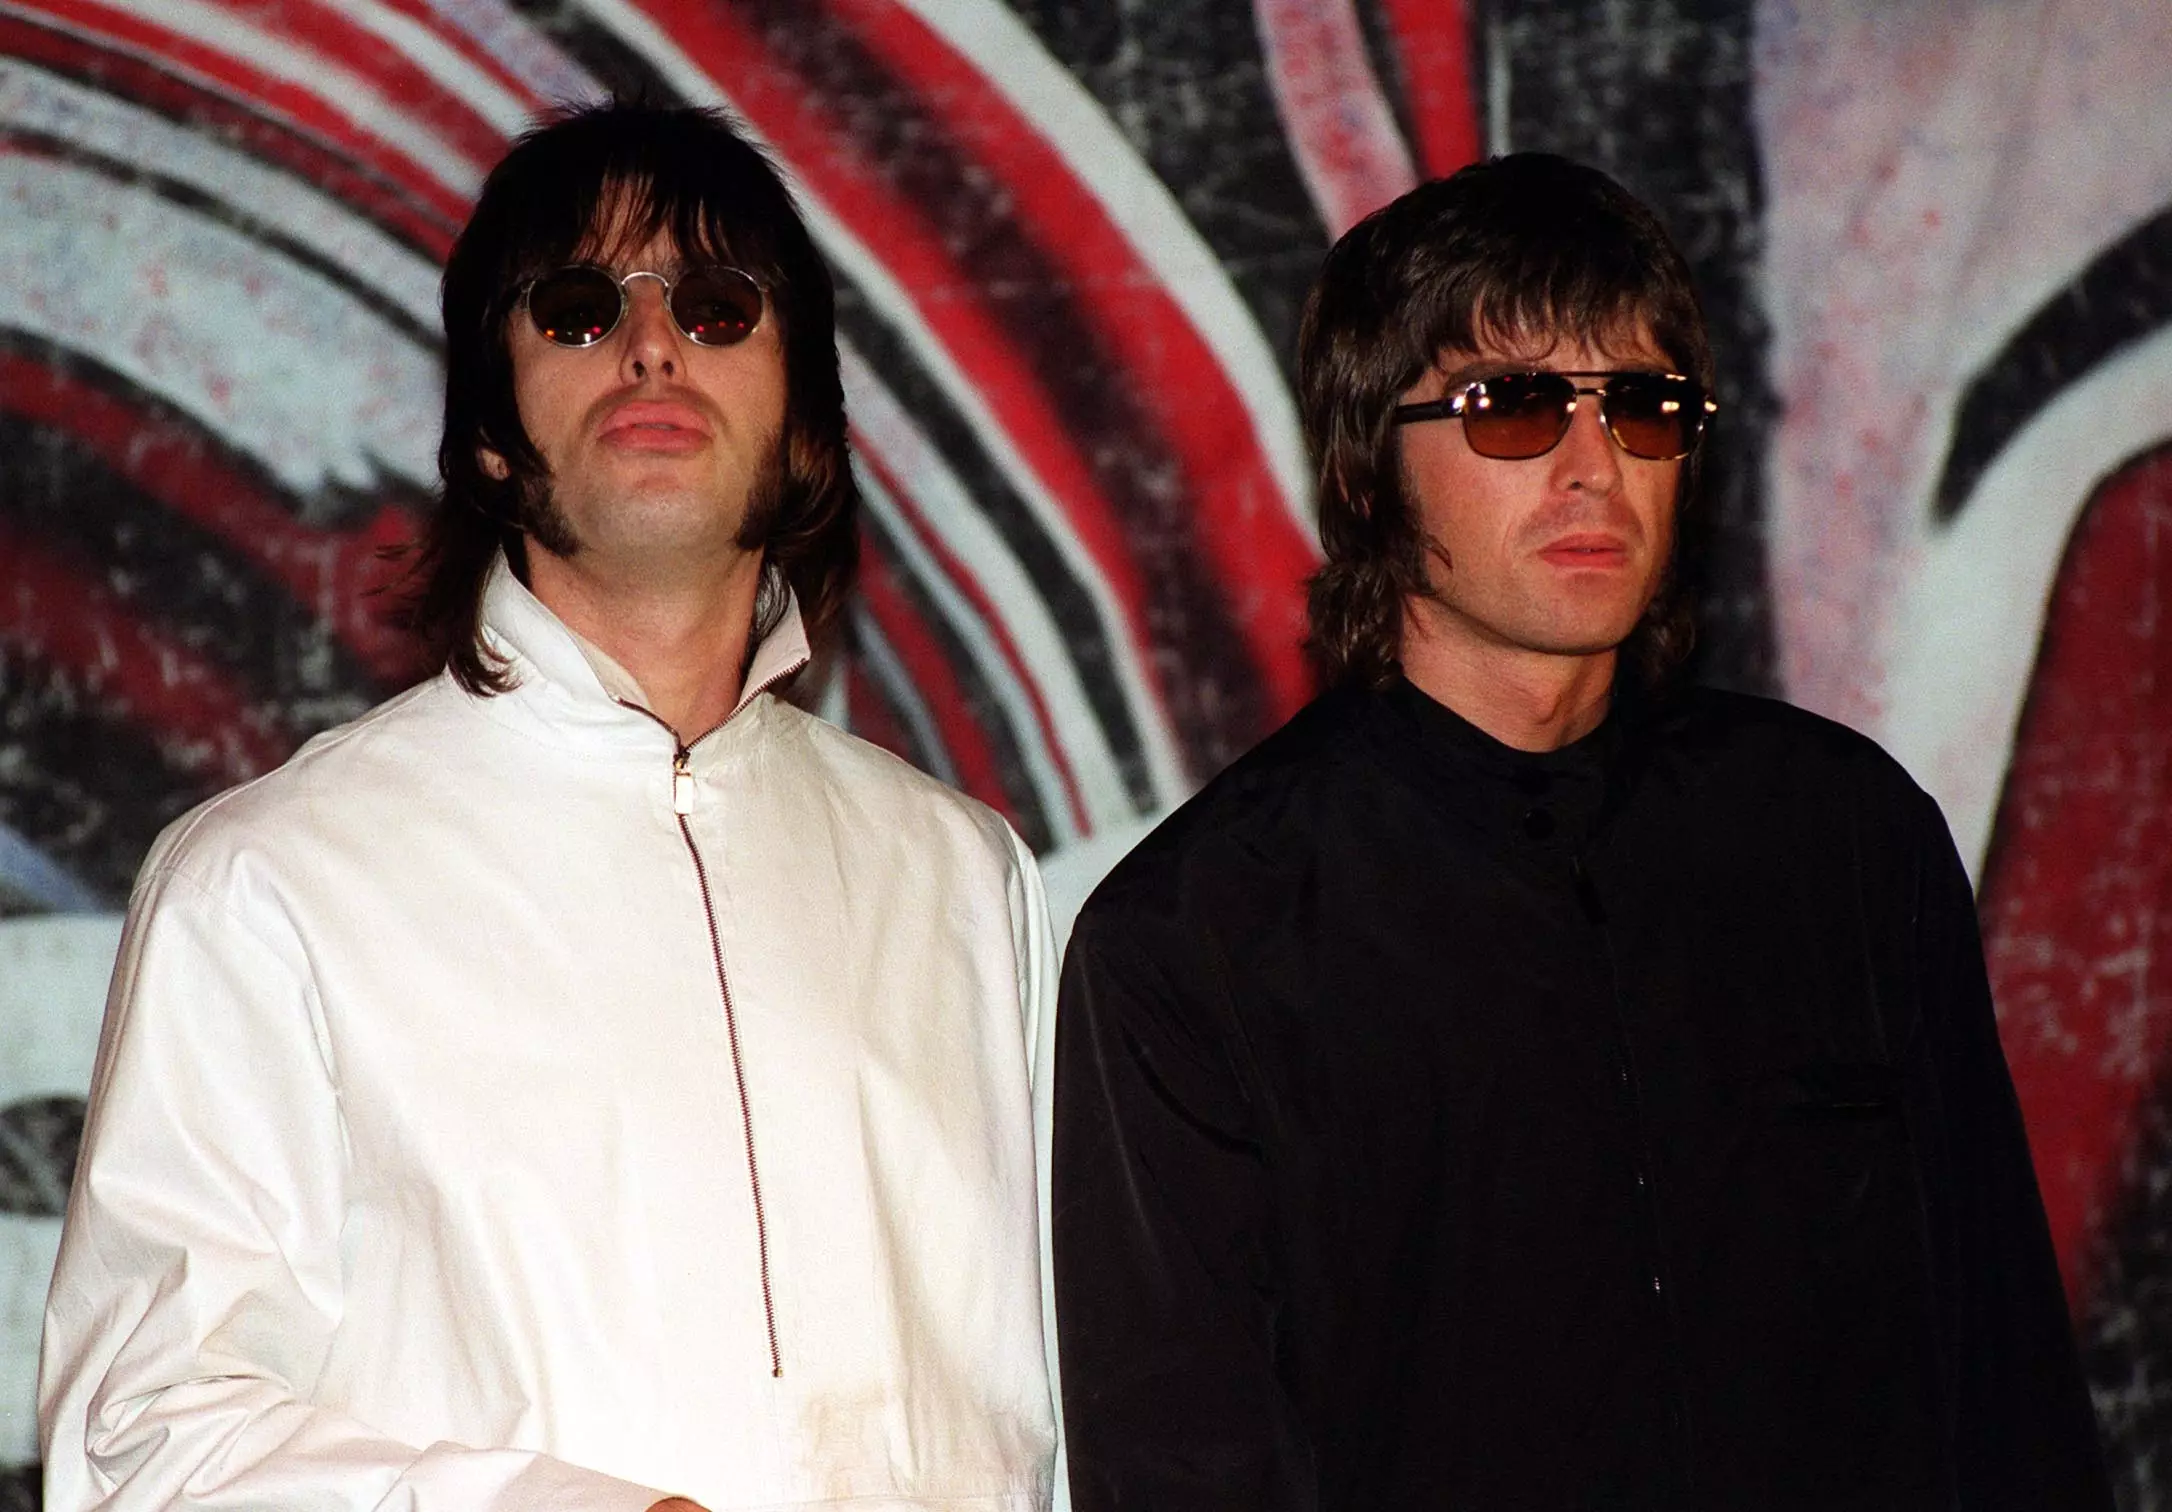 Oasis back in 1999, they probably still hated each other than. Image: PA Images